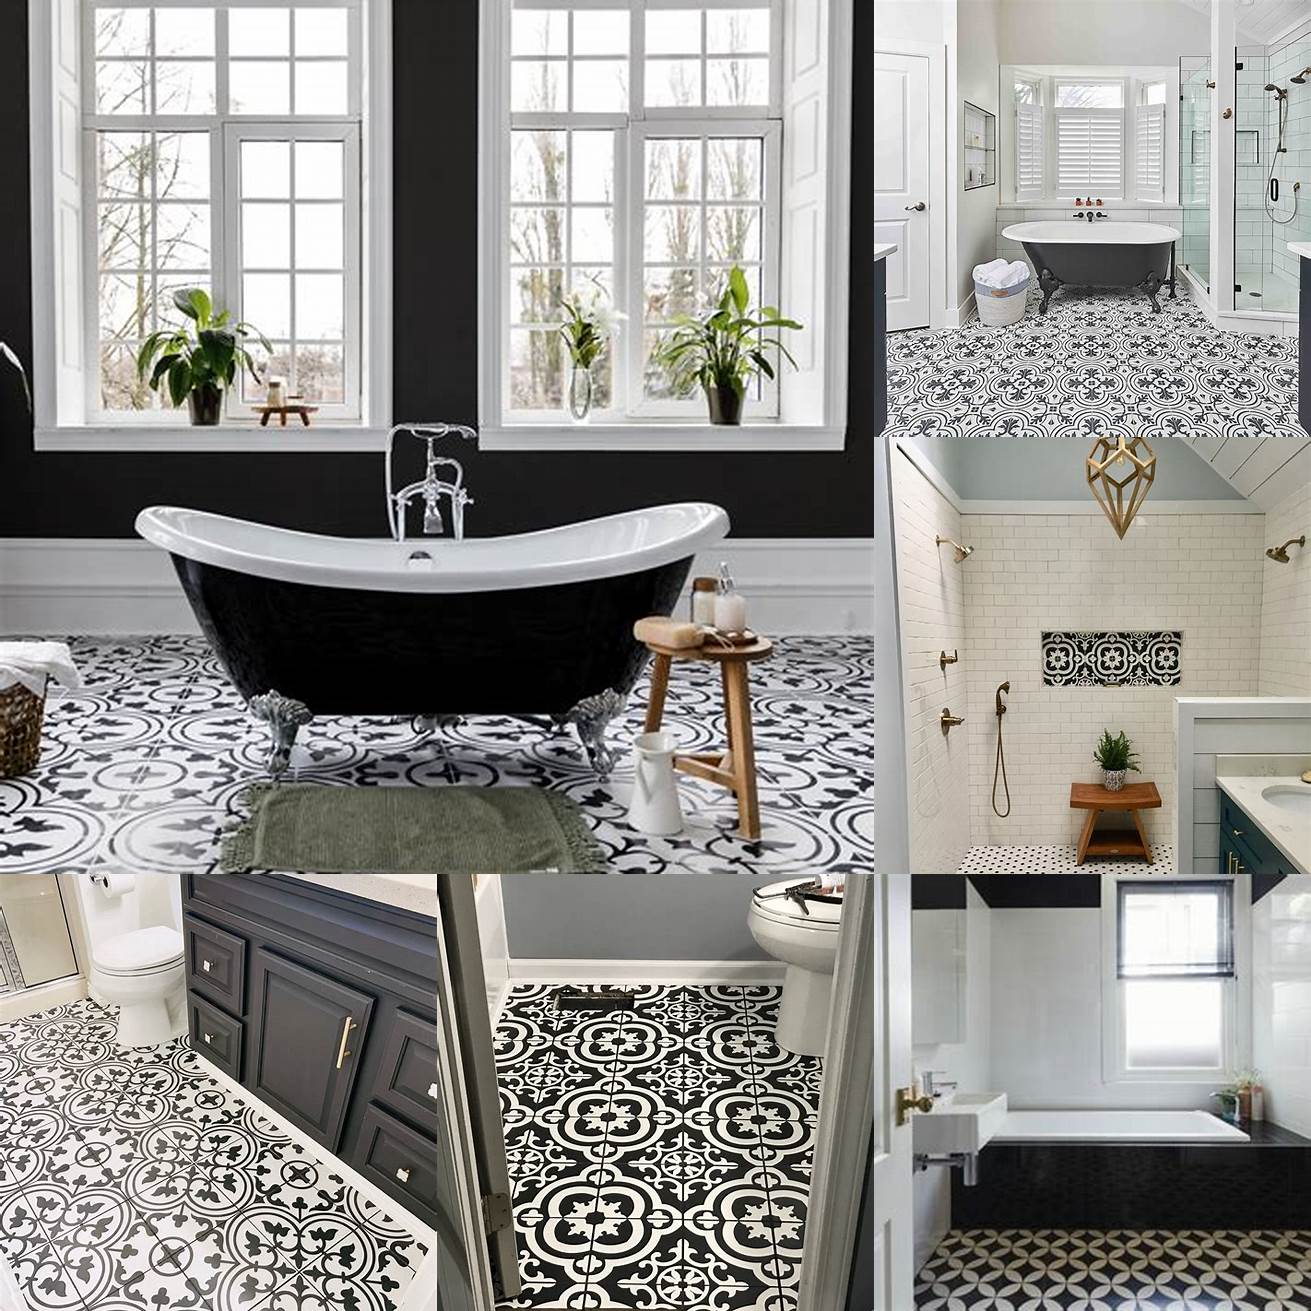 A black and white bathroom with a patterned floor tile and a brass showerhead